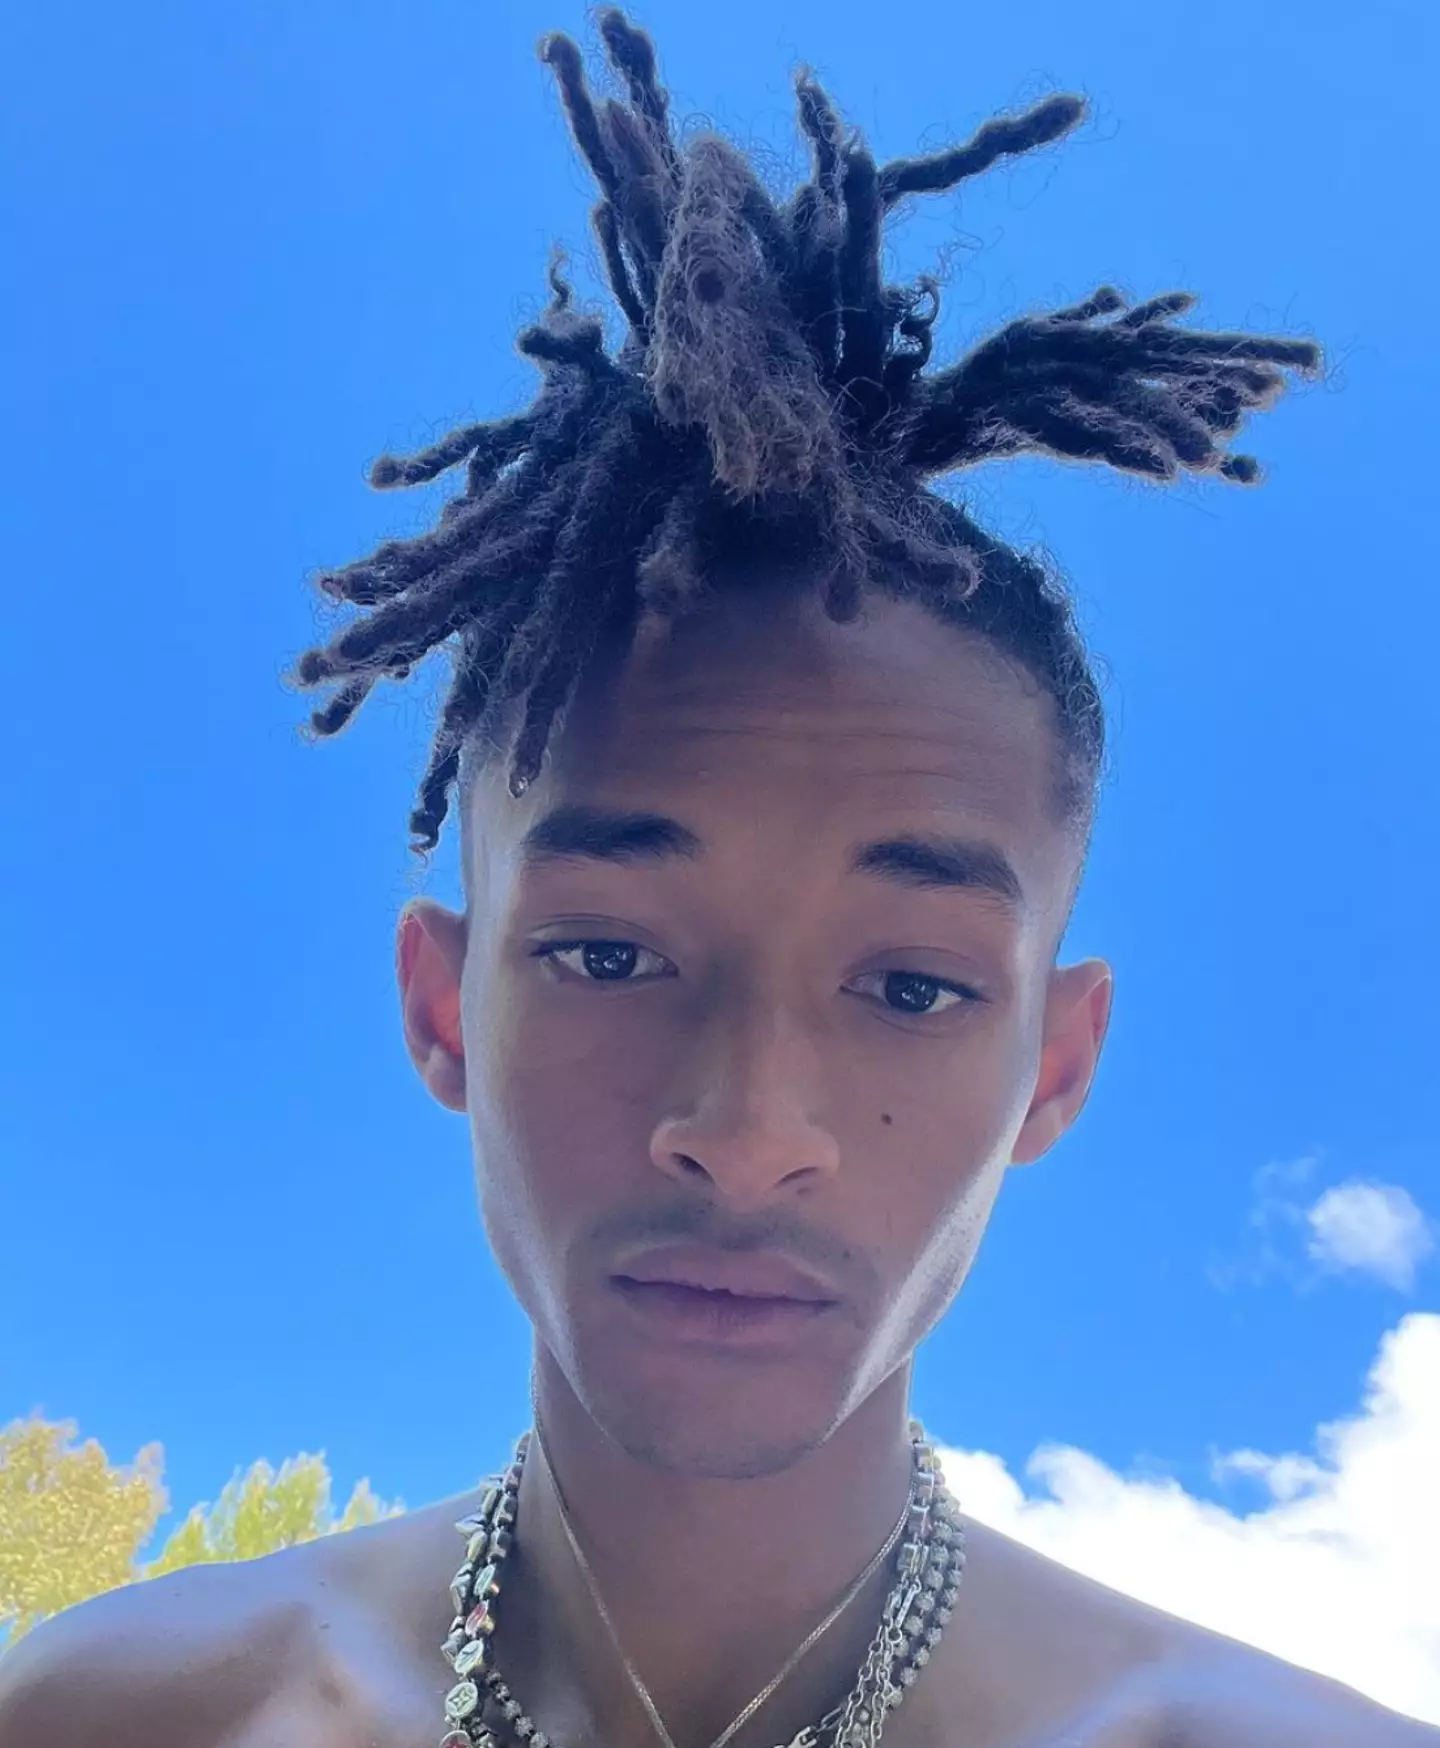 Jaden Smith opened up about psychedelics have helped him.